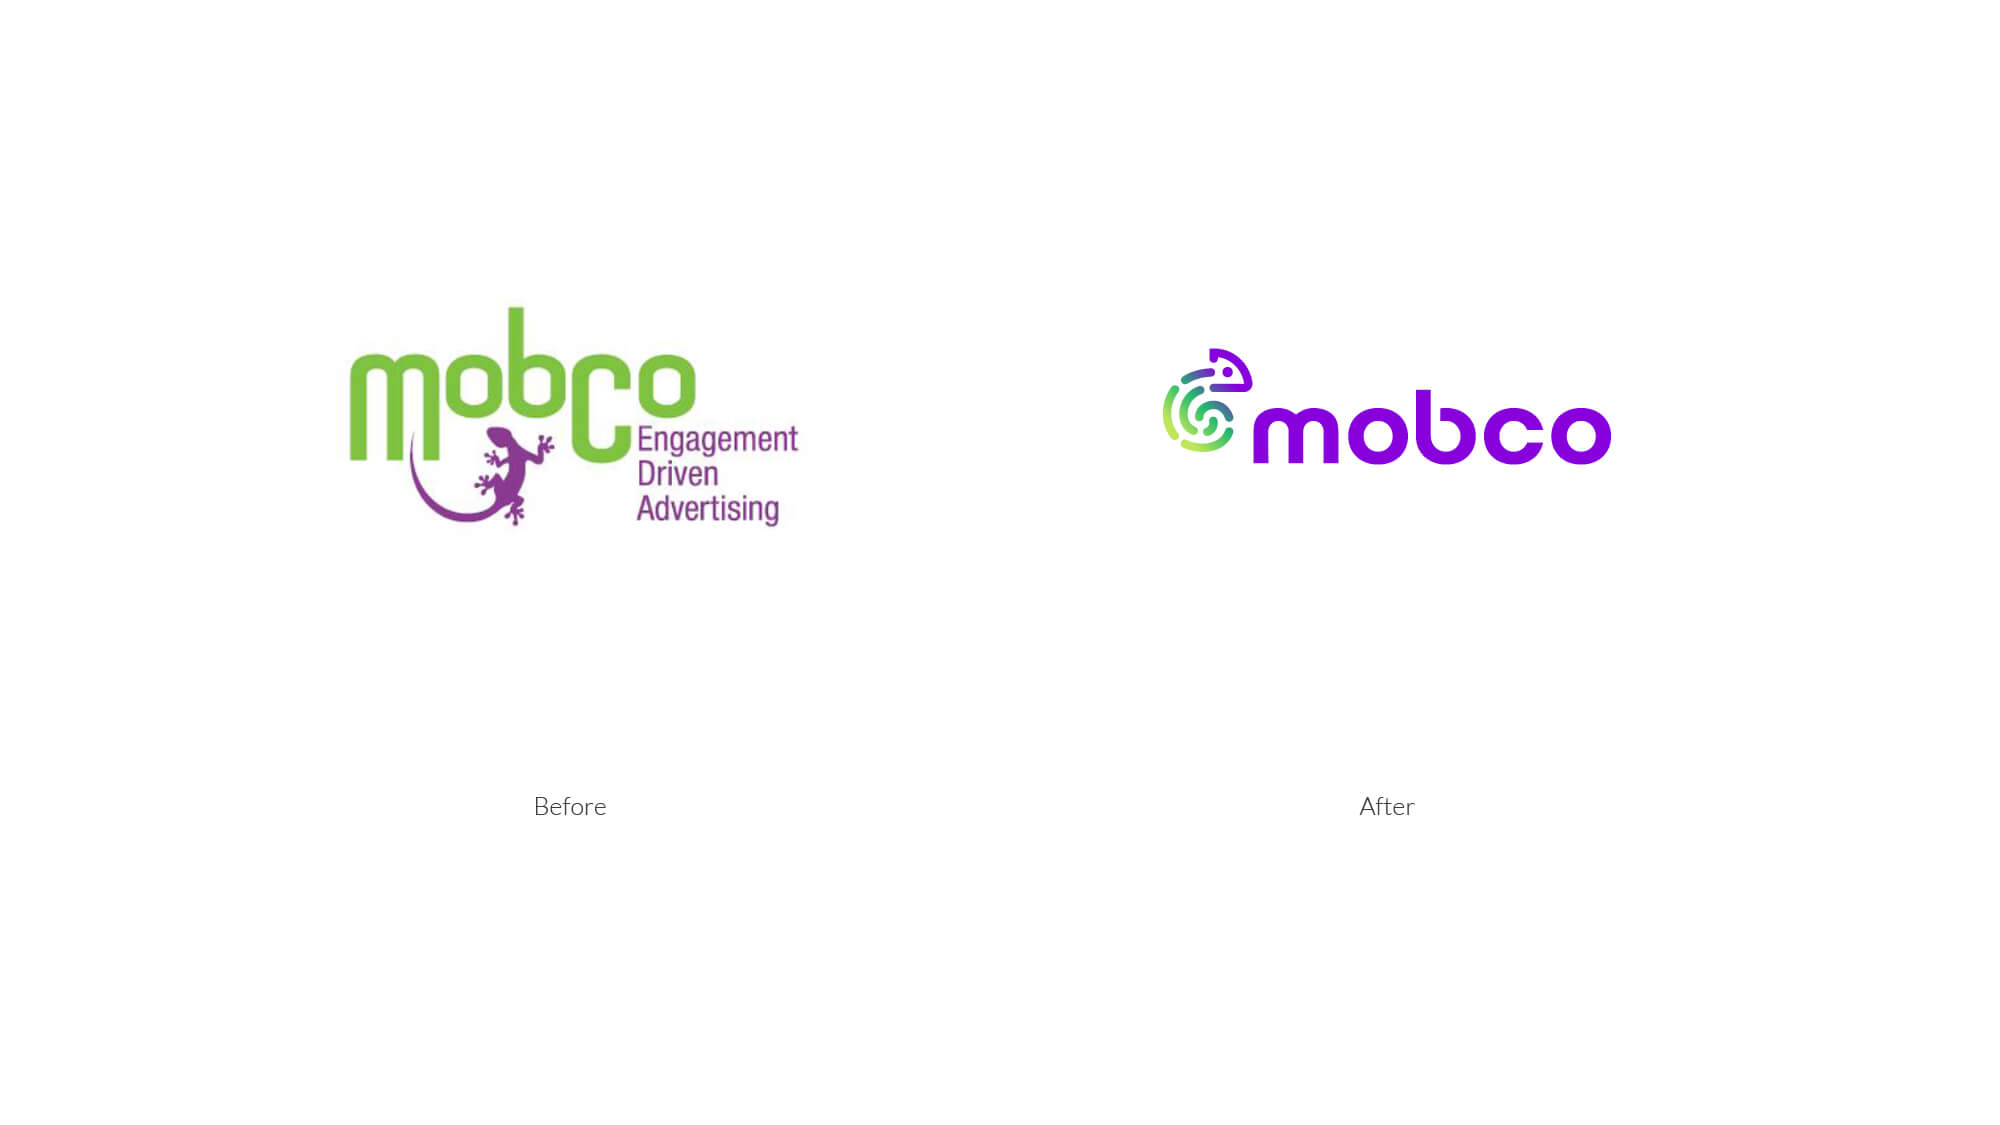 mobco logo before & after